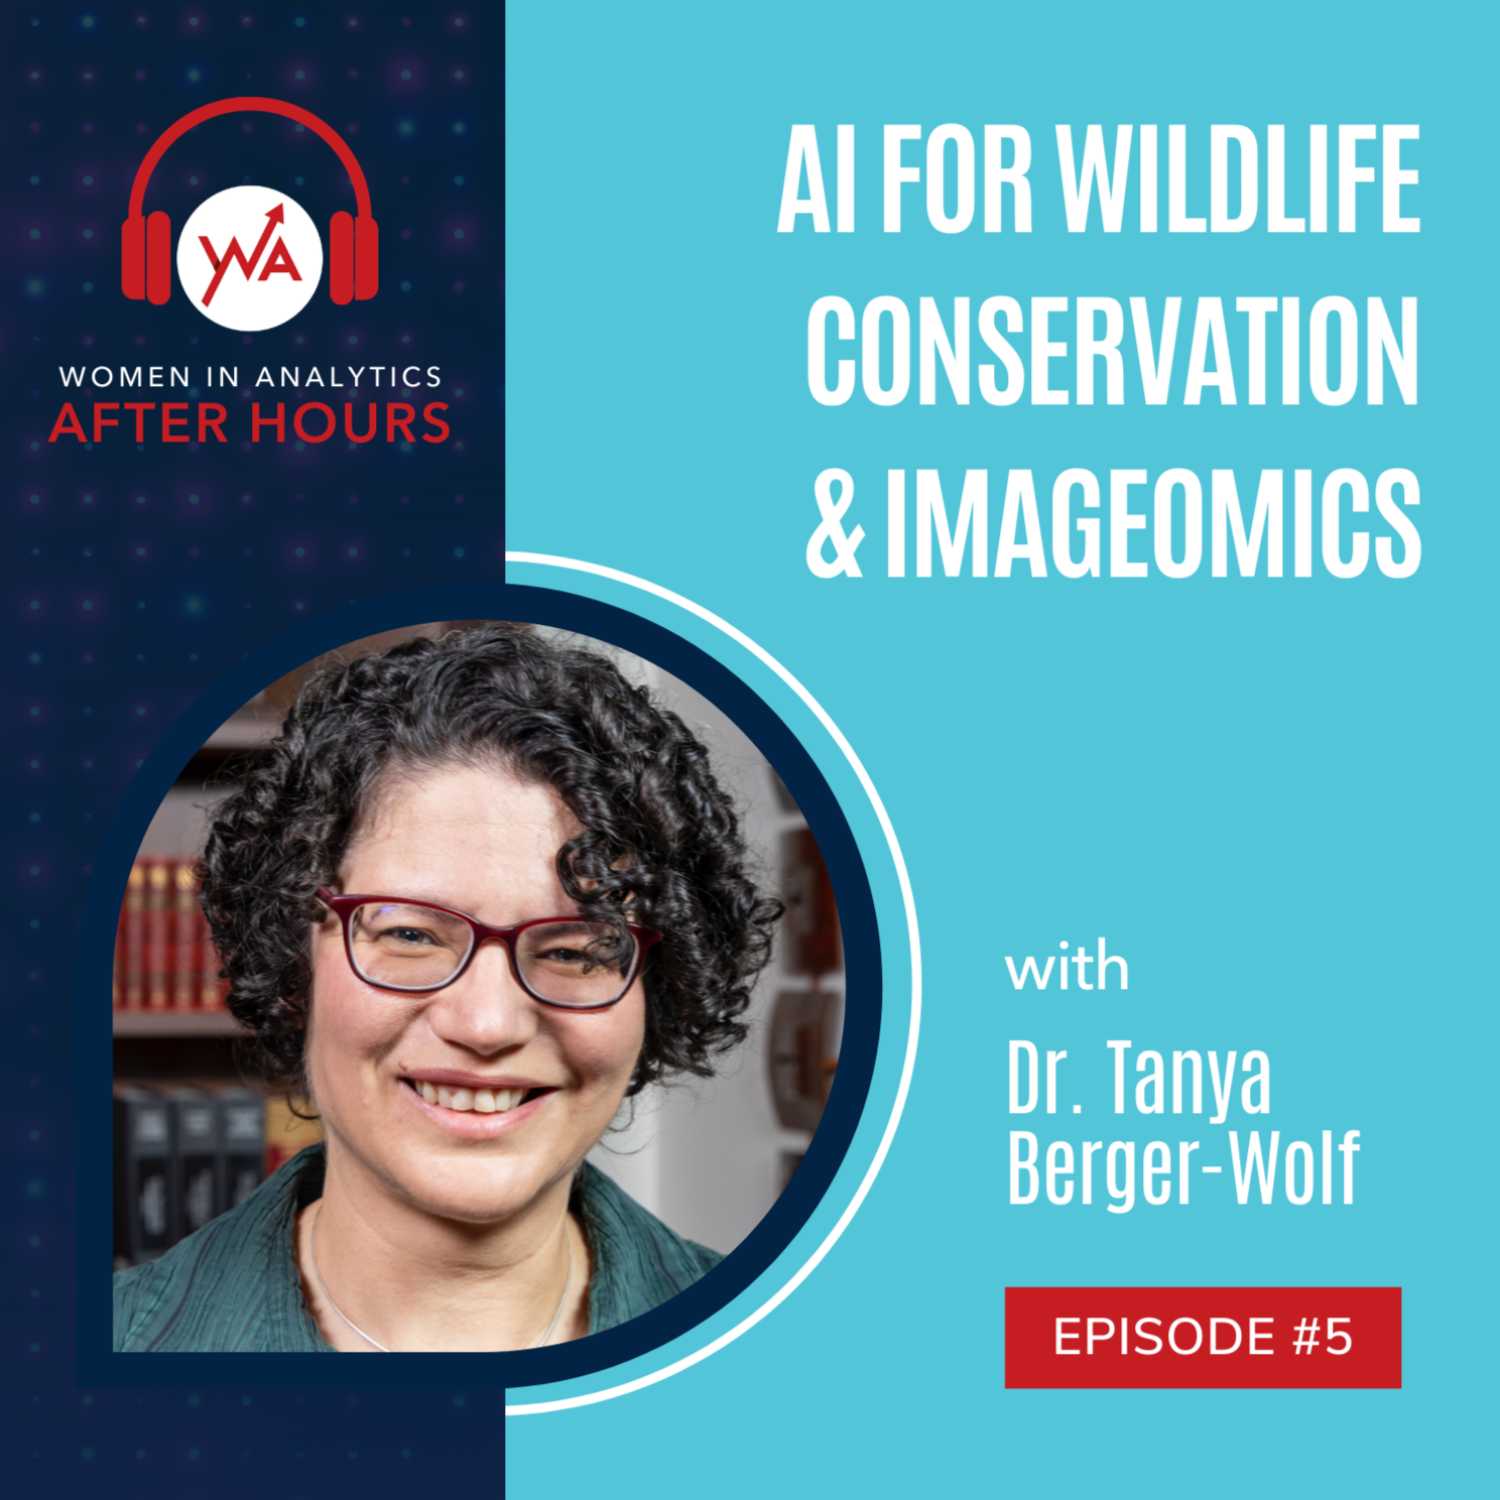 Episode 5 - AI for Wildlife Conservation and Imageomics with Dr. Tanya Berger-Wolf